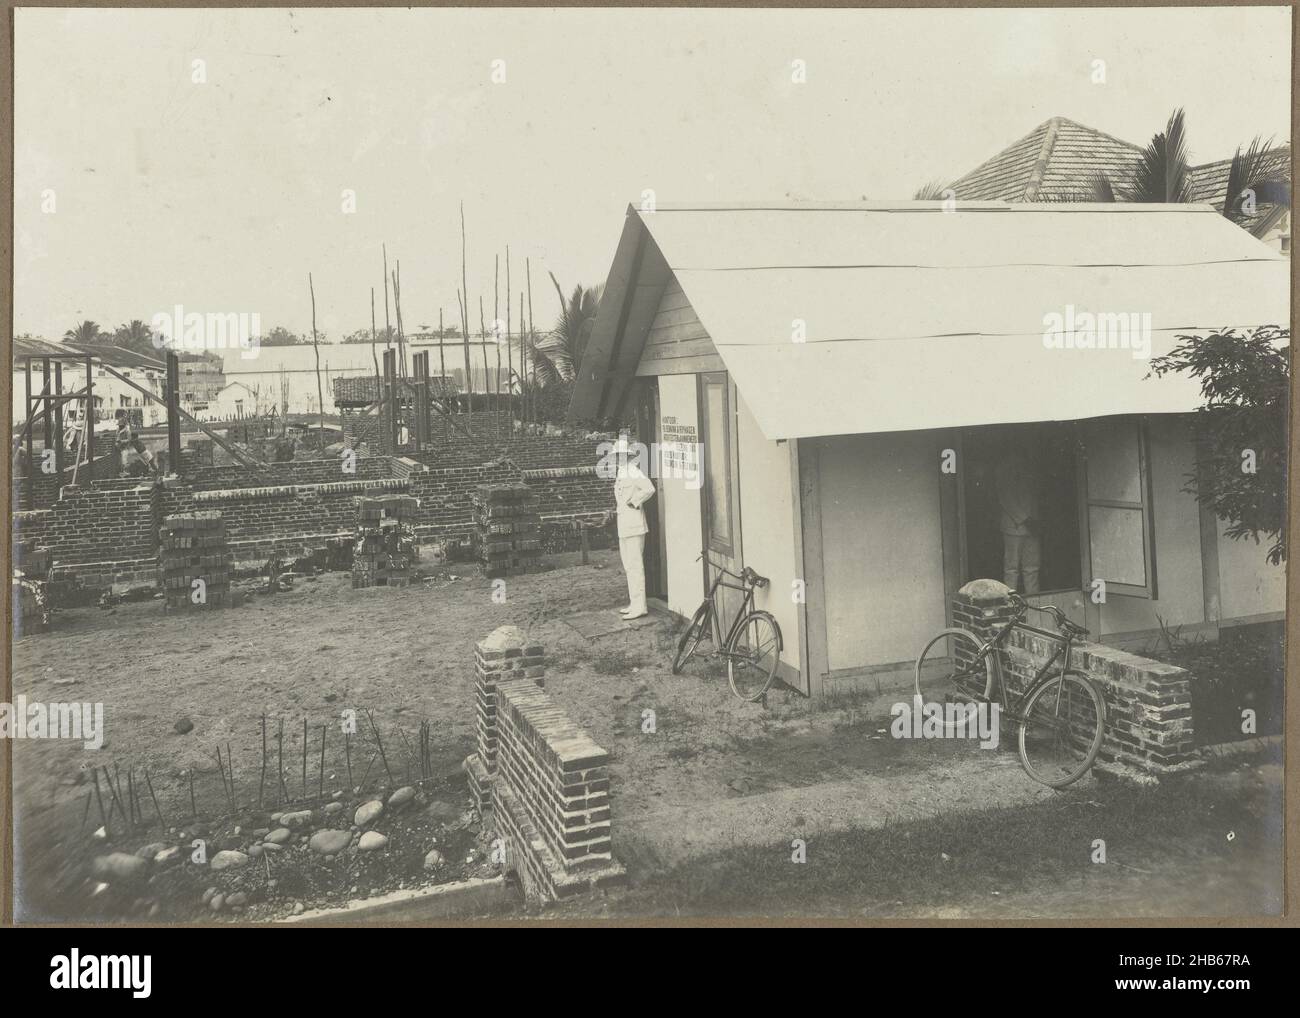 Construction of the Salvation Army Children's Home, The construction of the Salvation Army Children's Home on Wilhelminastraat in Medan in 1916. With Bennink standing in front of the construction company's office on the building site. Photo in the photo album of the Dutch architectural and construction company Bennink and Riphagen in Medan in the years ca. 1914-1919., anonymous, Medan, 1916, photographic support, gelatin silver print, height 145 mm × width 201 mm Stock Photo